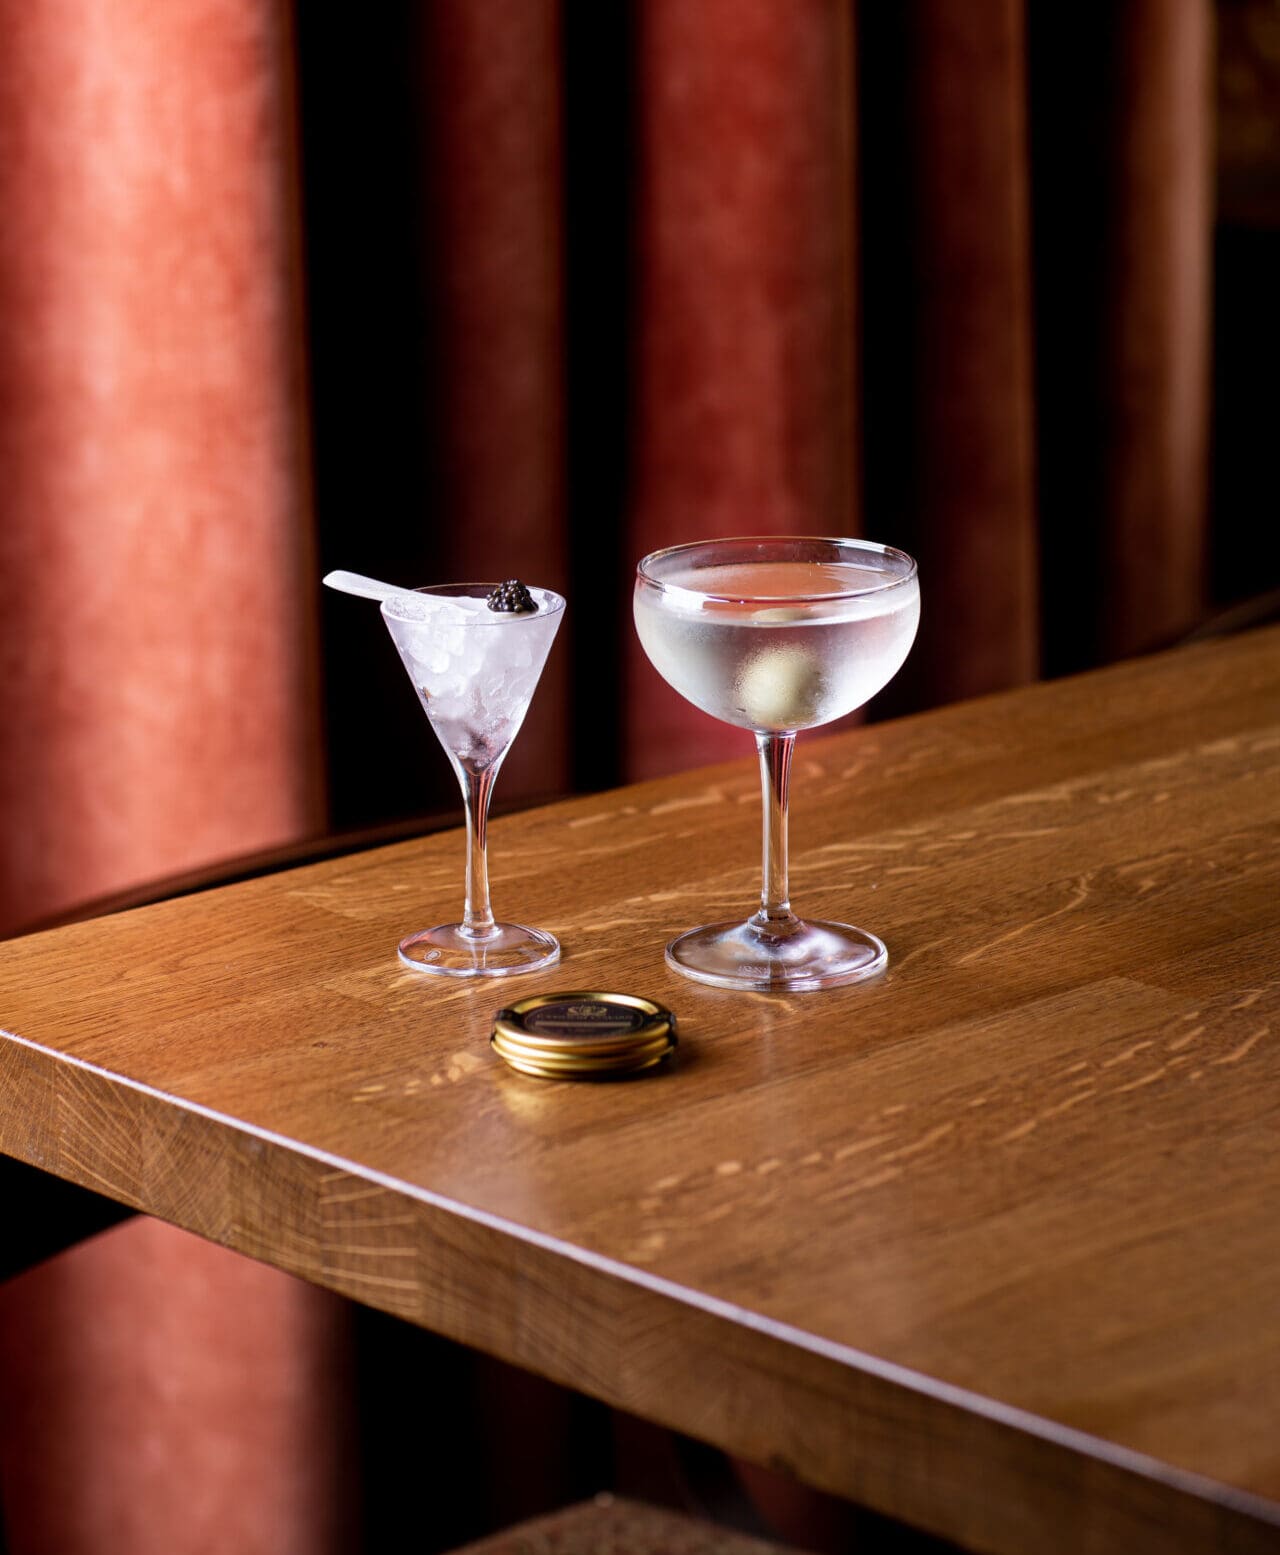 London's best bars | Two ice-cold cocktails in a coupe and a martini glass on a wooden table with a red backdrop at The Cadogan Arms